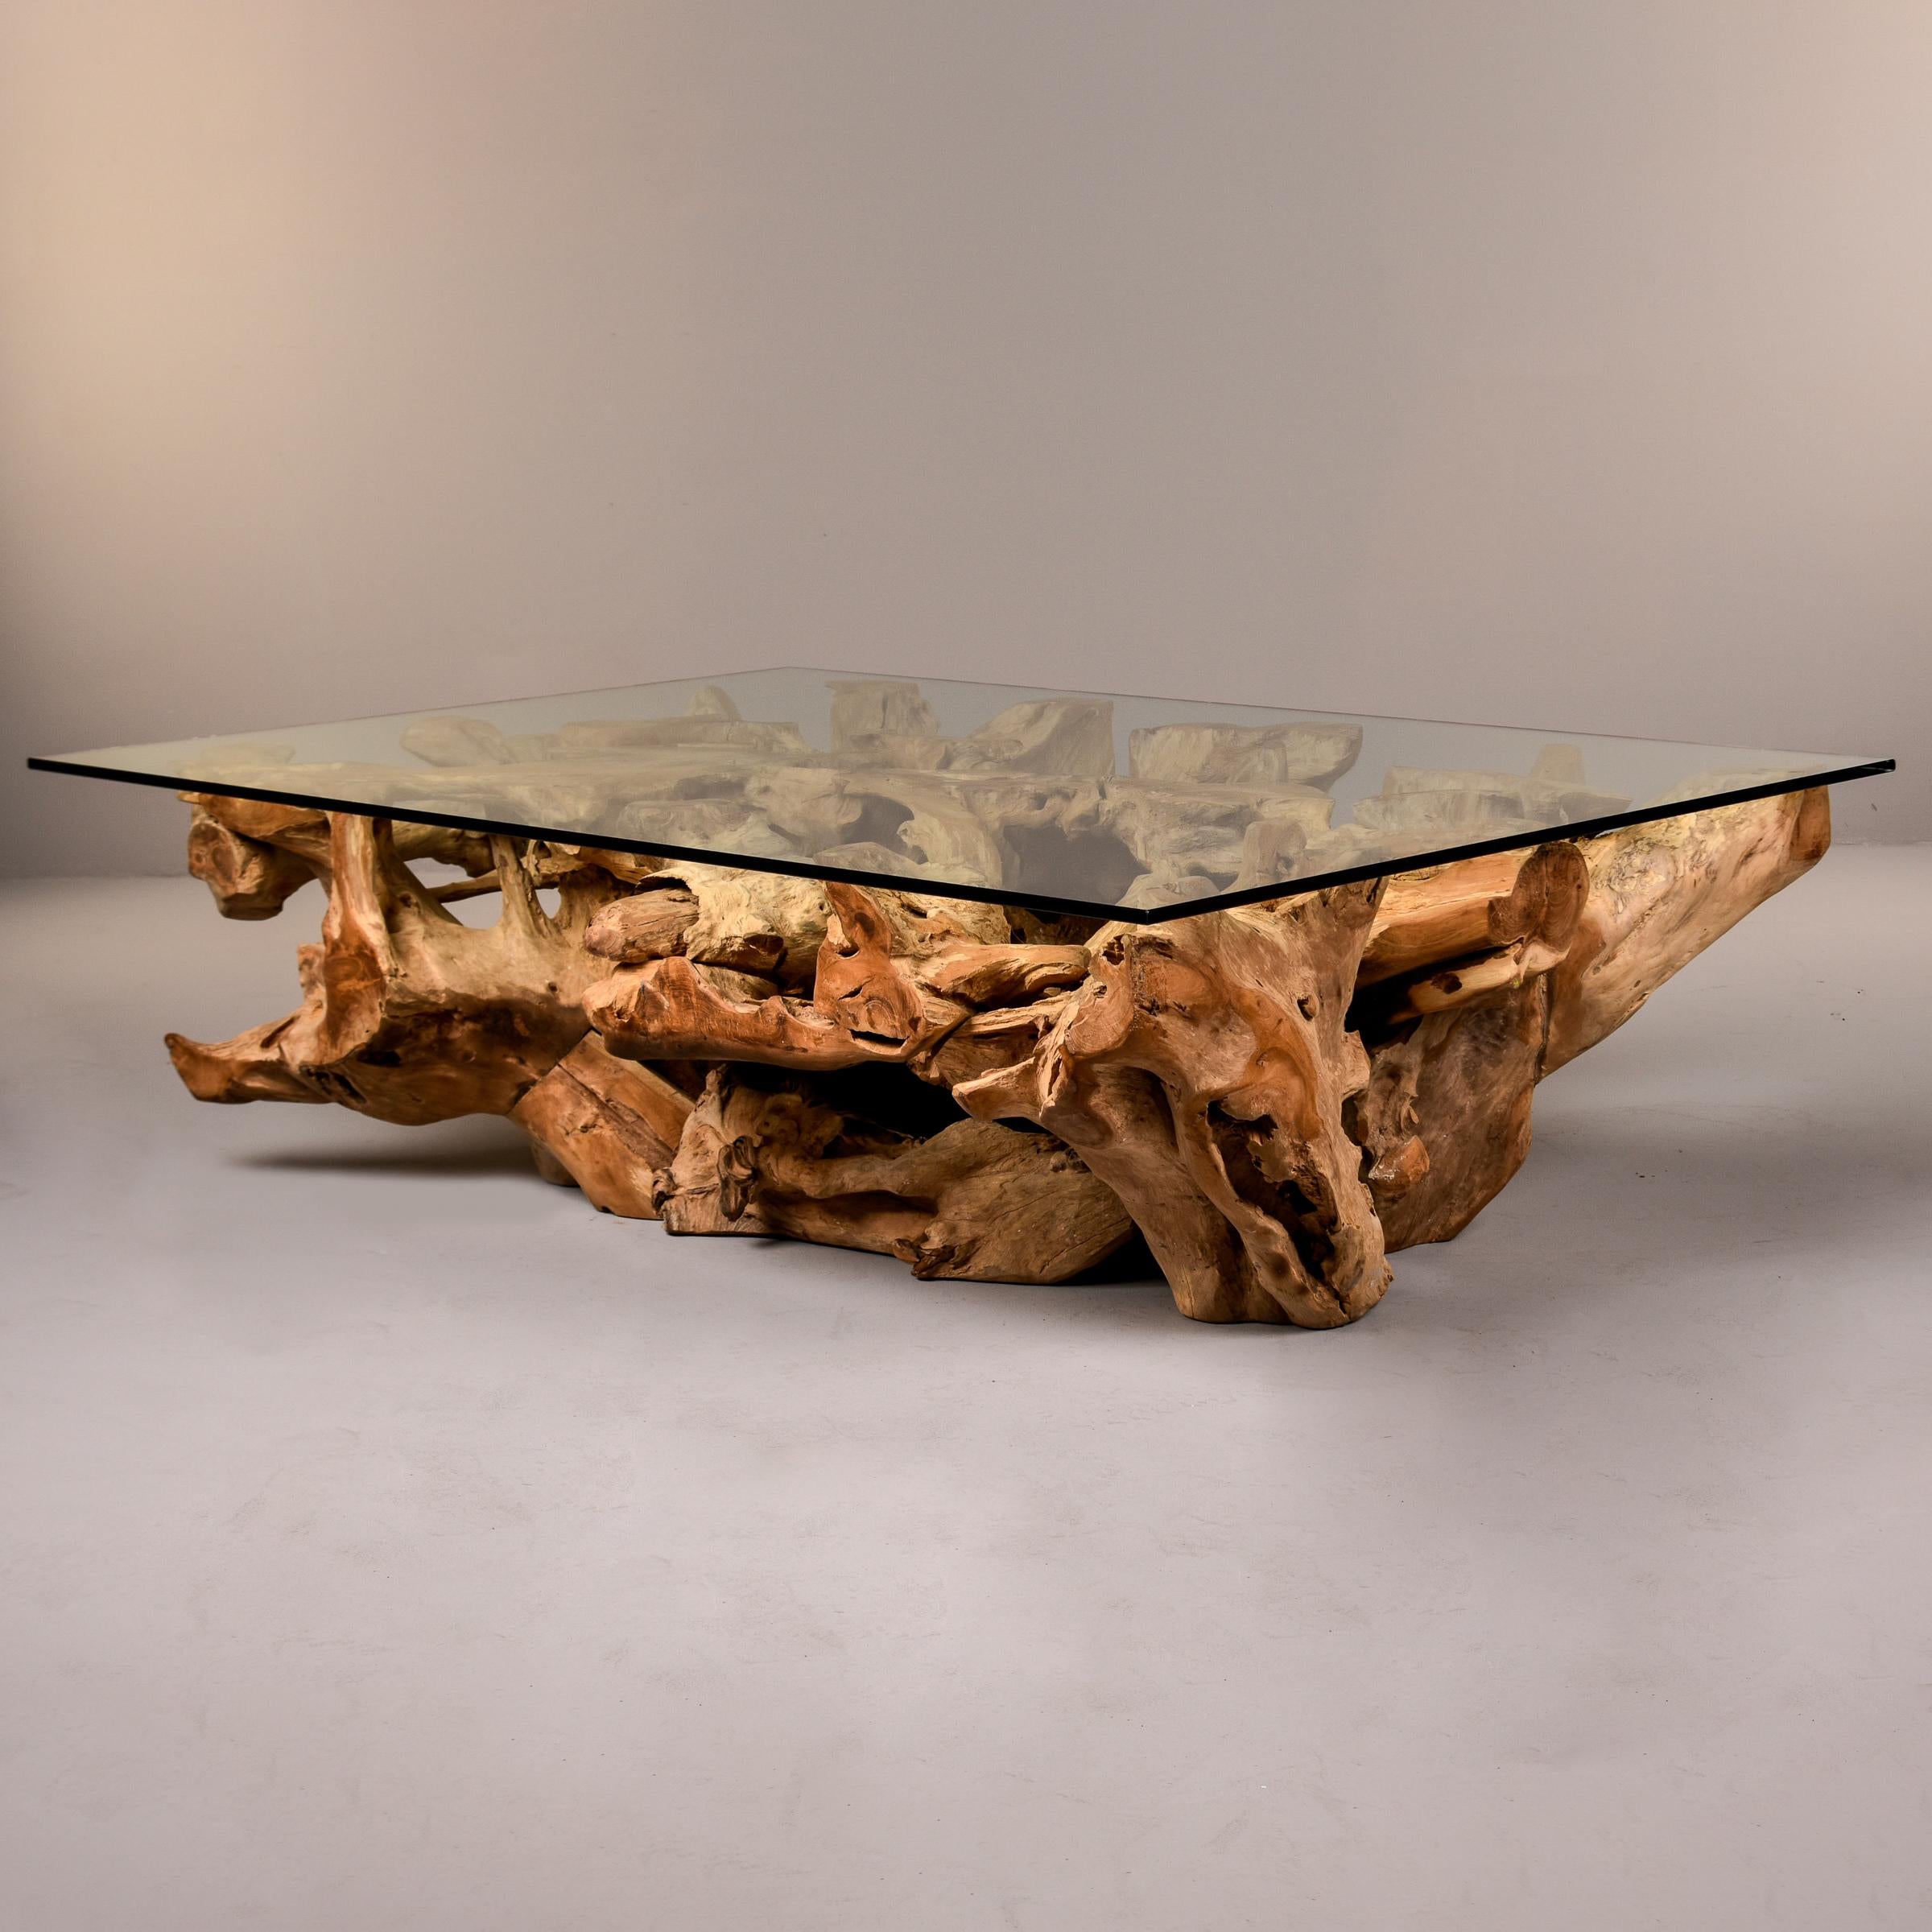 Dramatic, extra large coffee or cocktail table that consists of a sculptural teak root base and thick, clear glass top. Teak root base has been cut so that glass is well-supported and sits level. Teak has interesting color variation and shape3995.